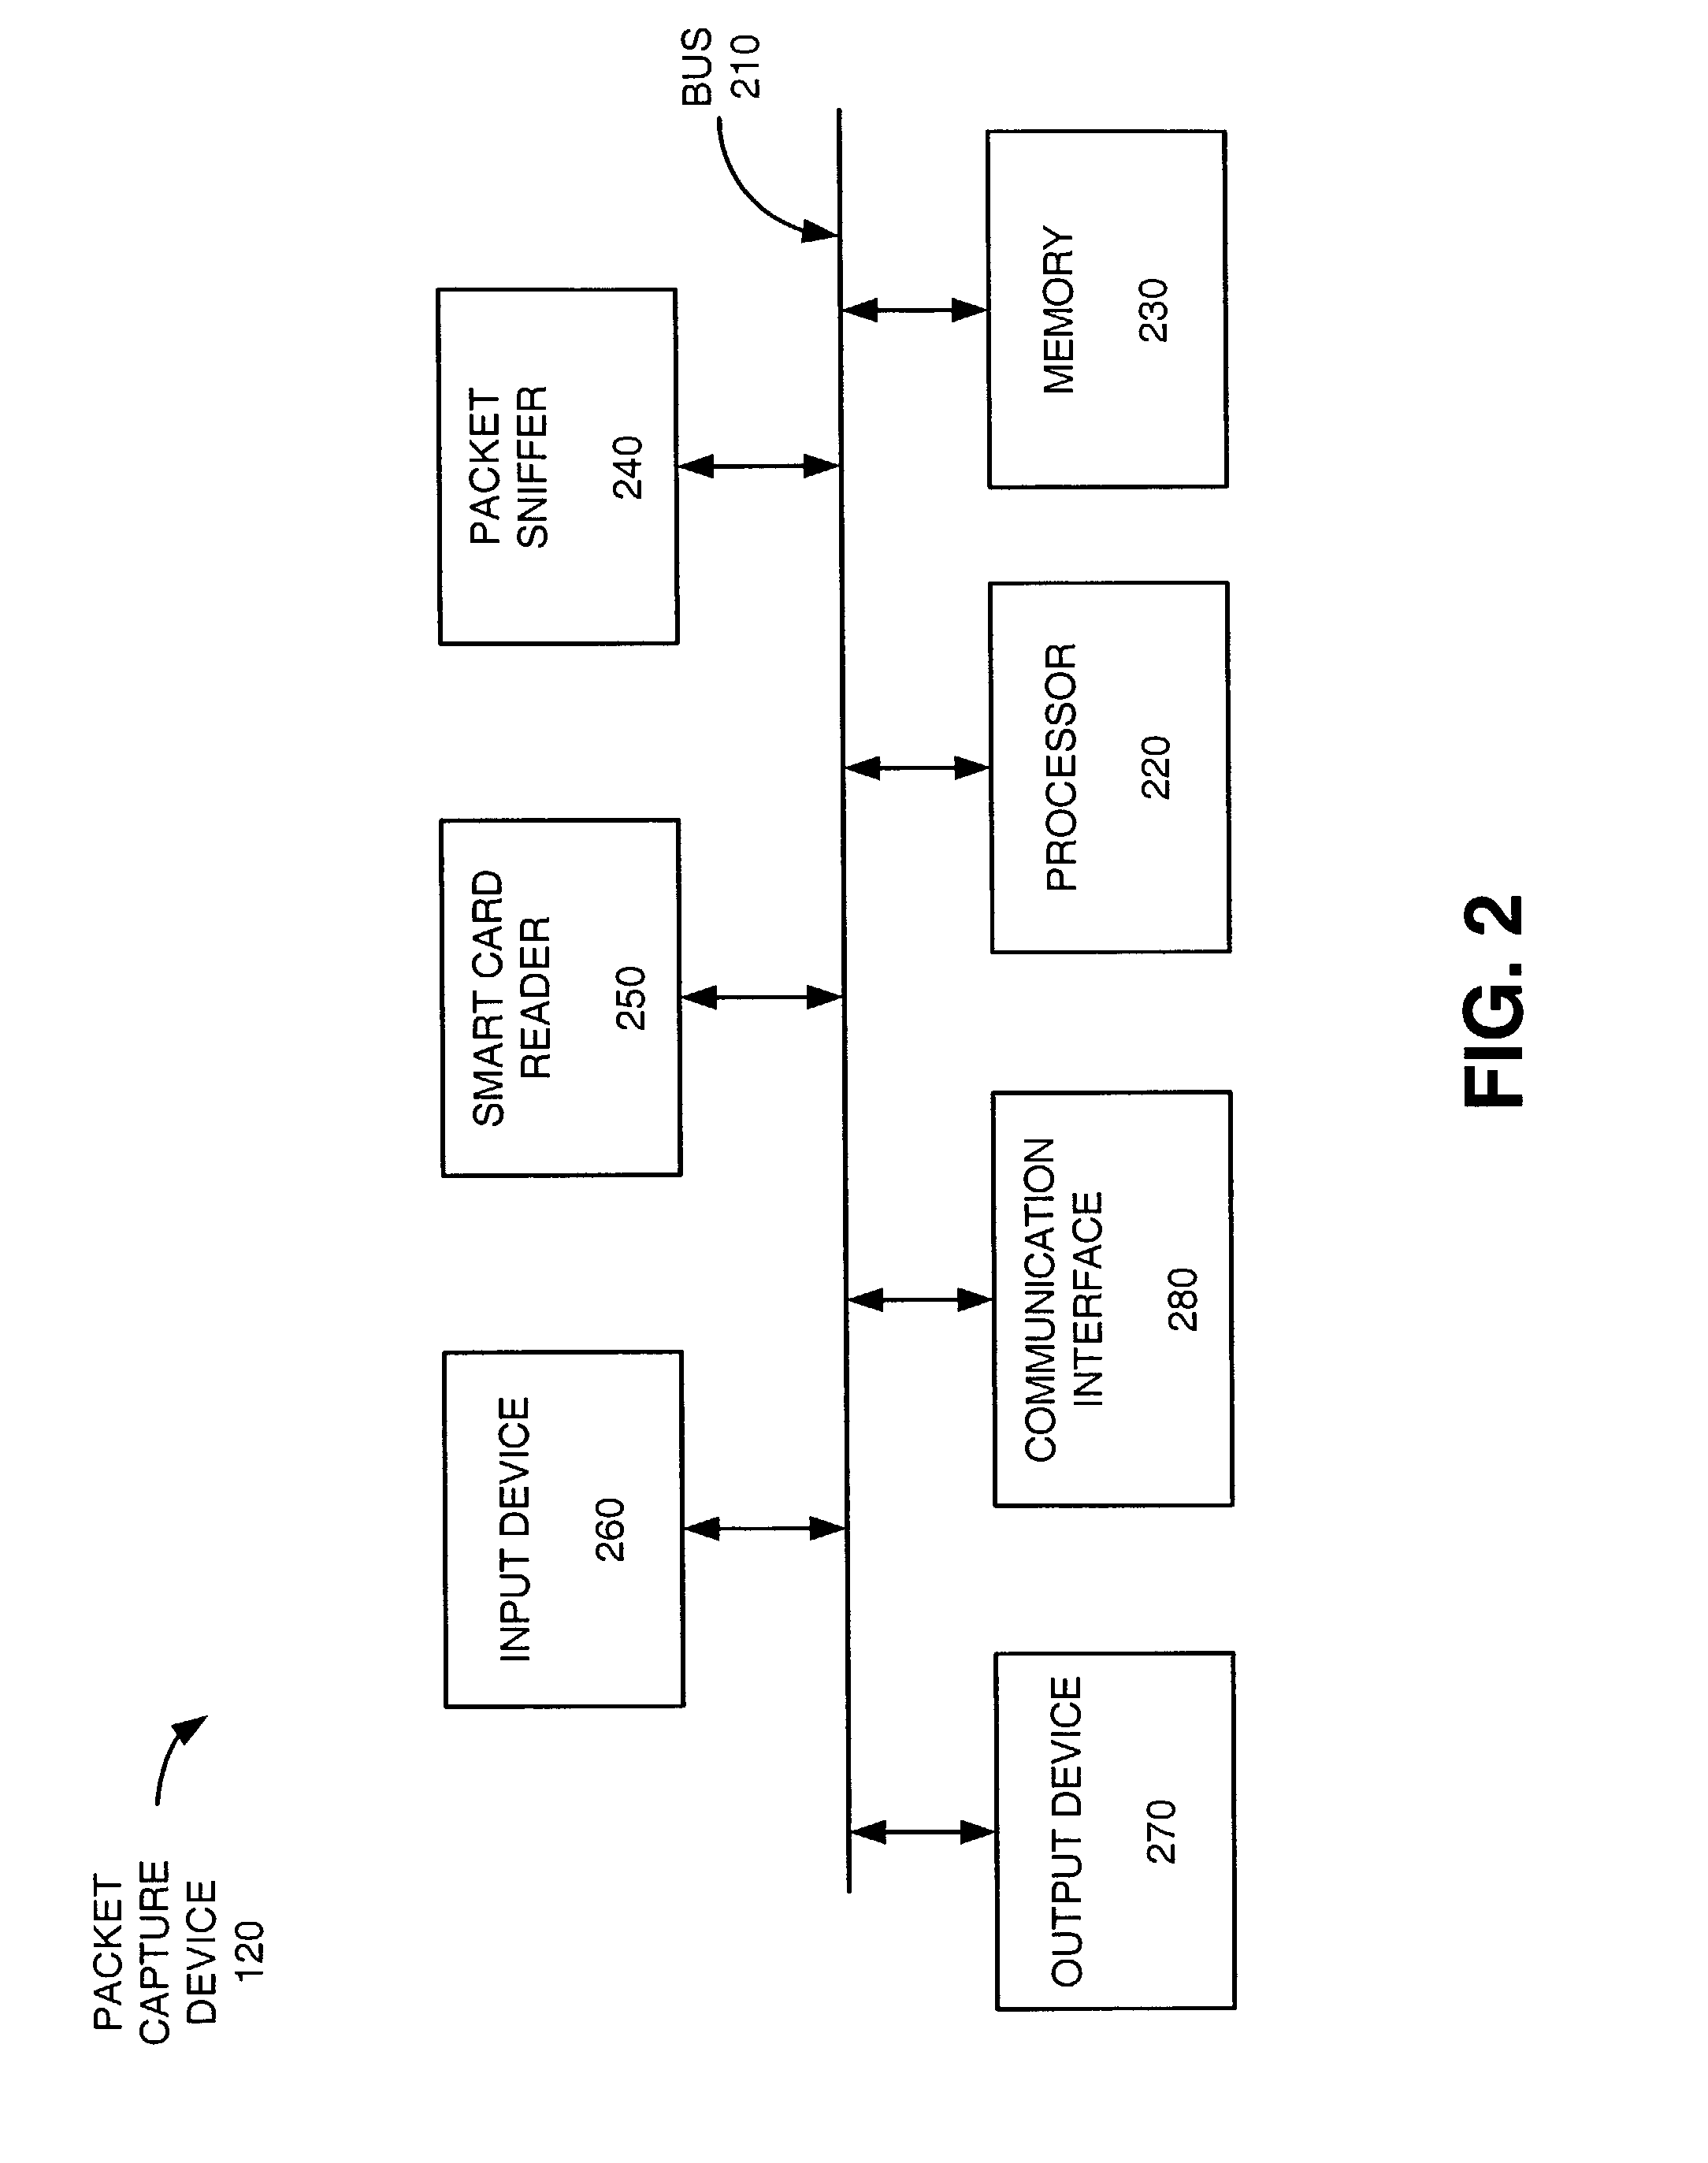 Systems and methods for performing electronic surveillance